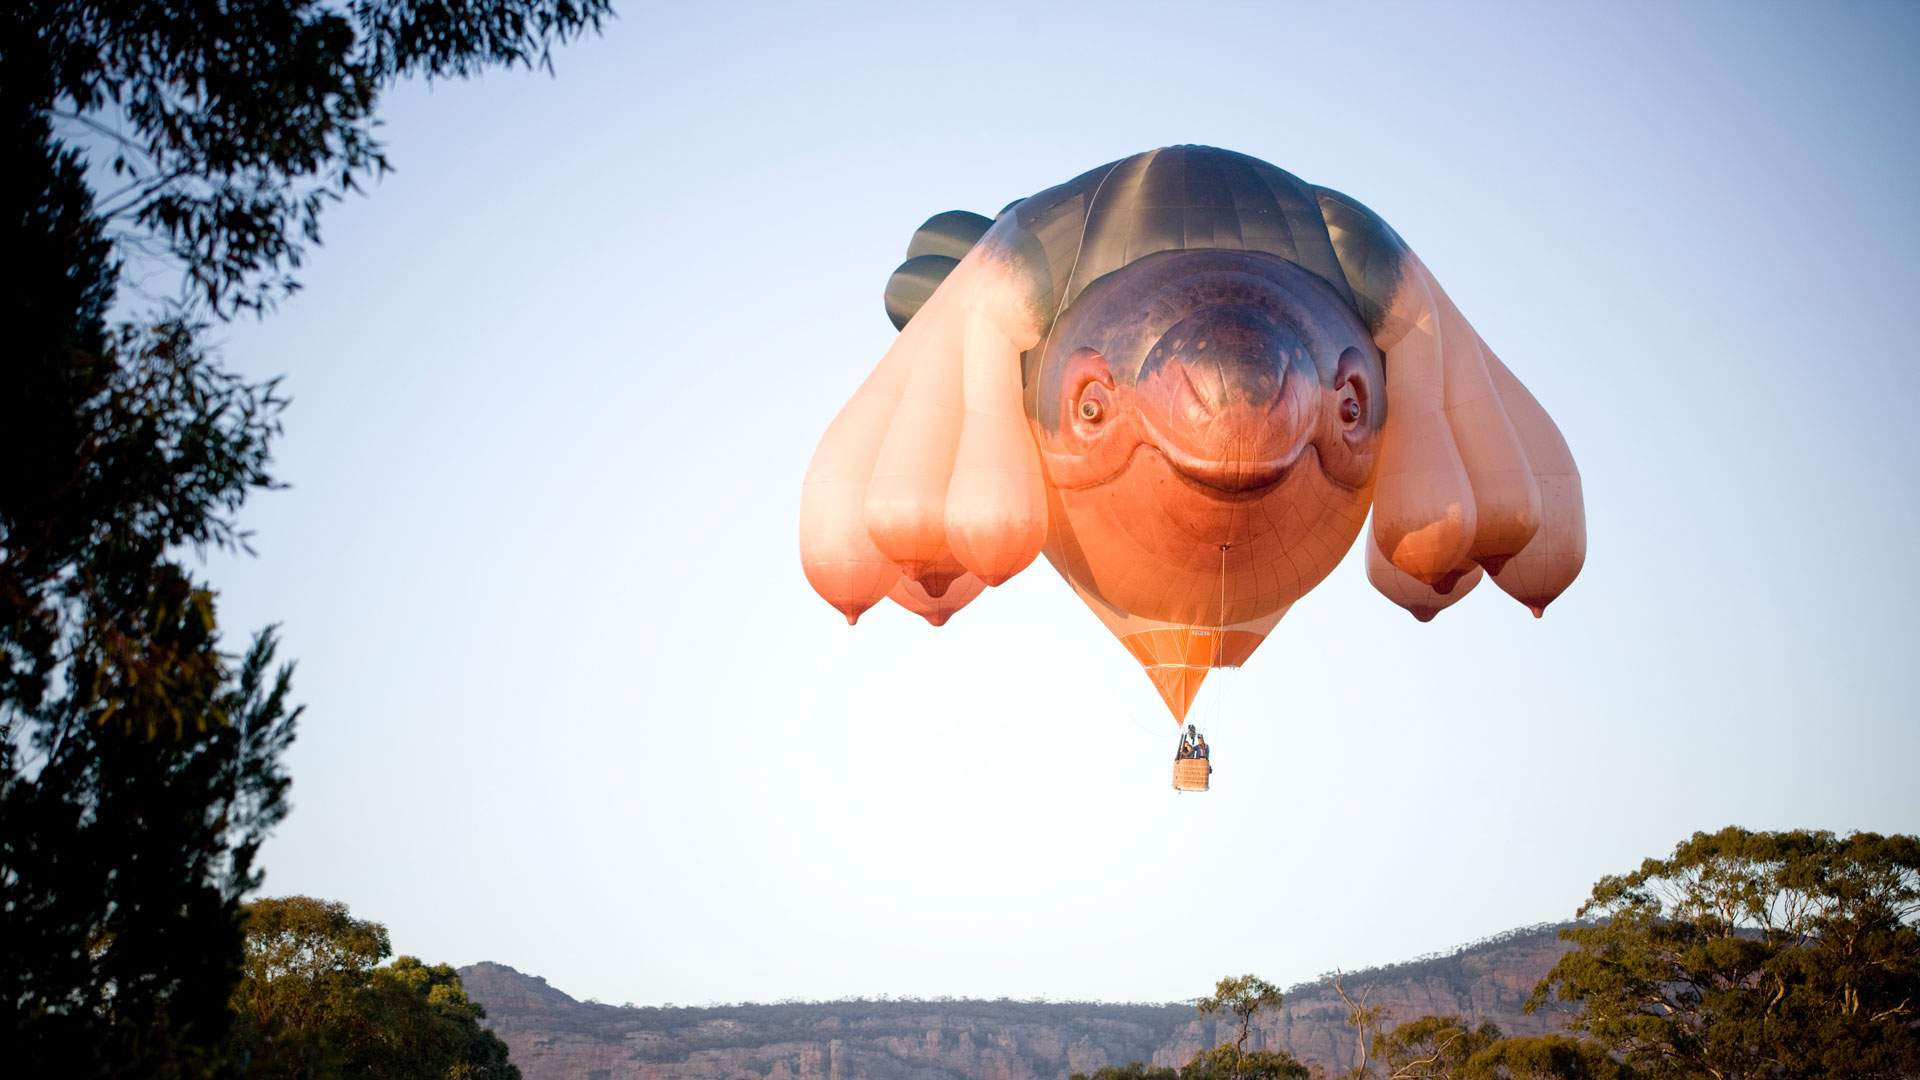 Patricia Piccinini's Otherworldly 'Skywhale' Flew Over the Yarra Valley This Morning